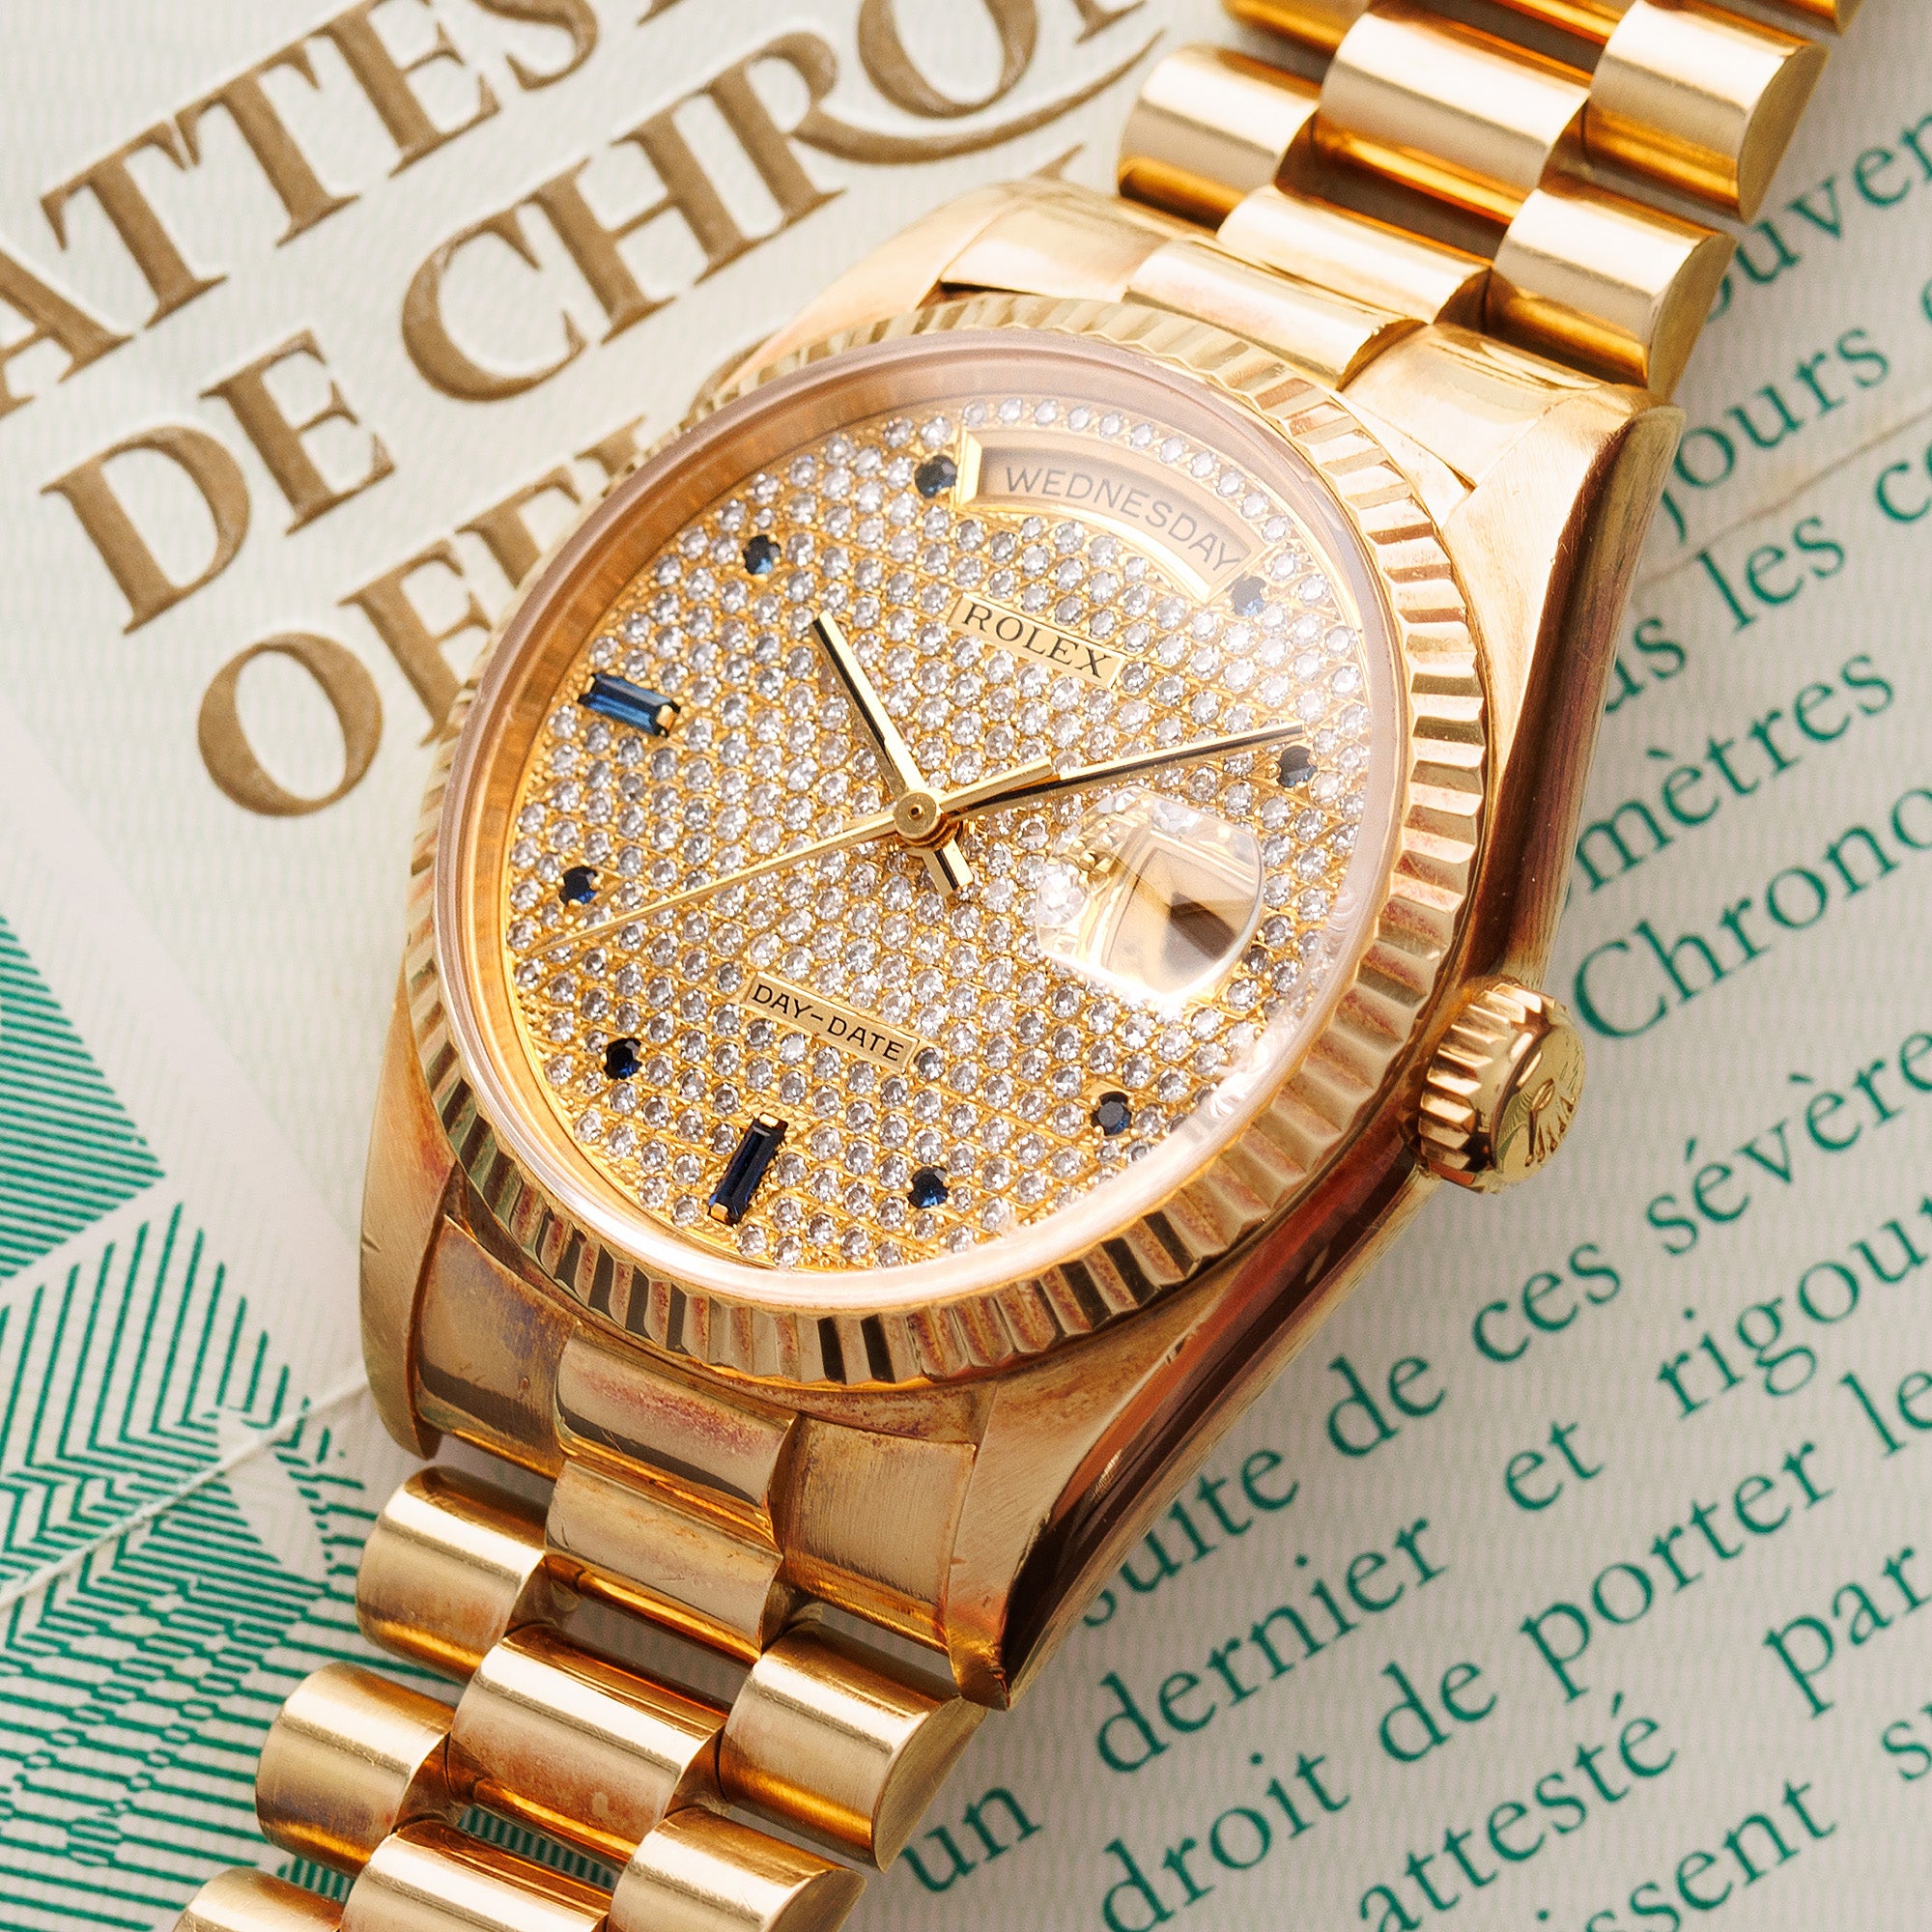 Rolex - Rolex Yellow Gold Day-Date Ref. 18238 with Pave Diamonds and Sapphire Markers - The Keystone Watches